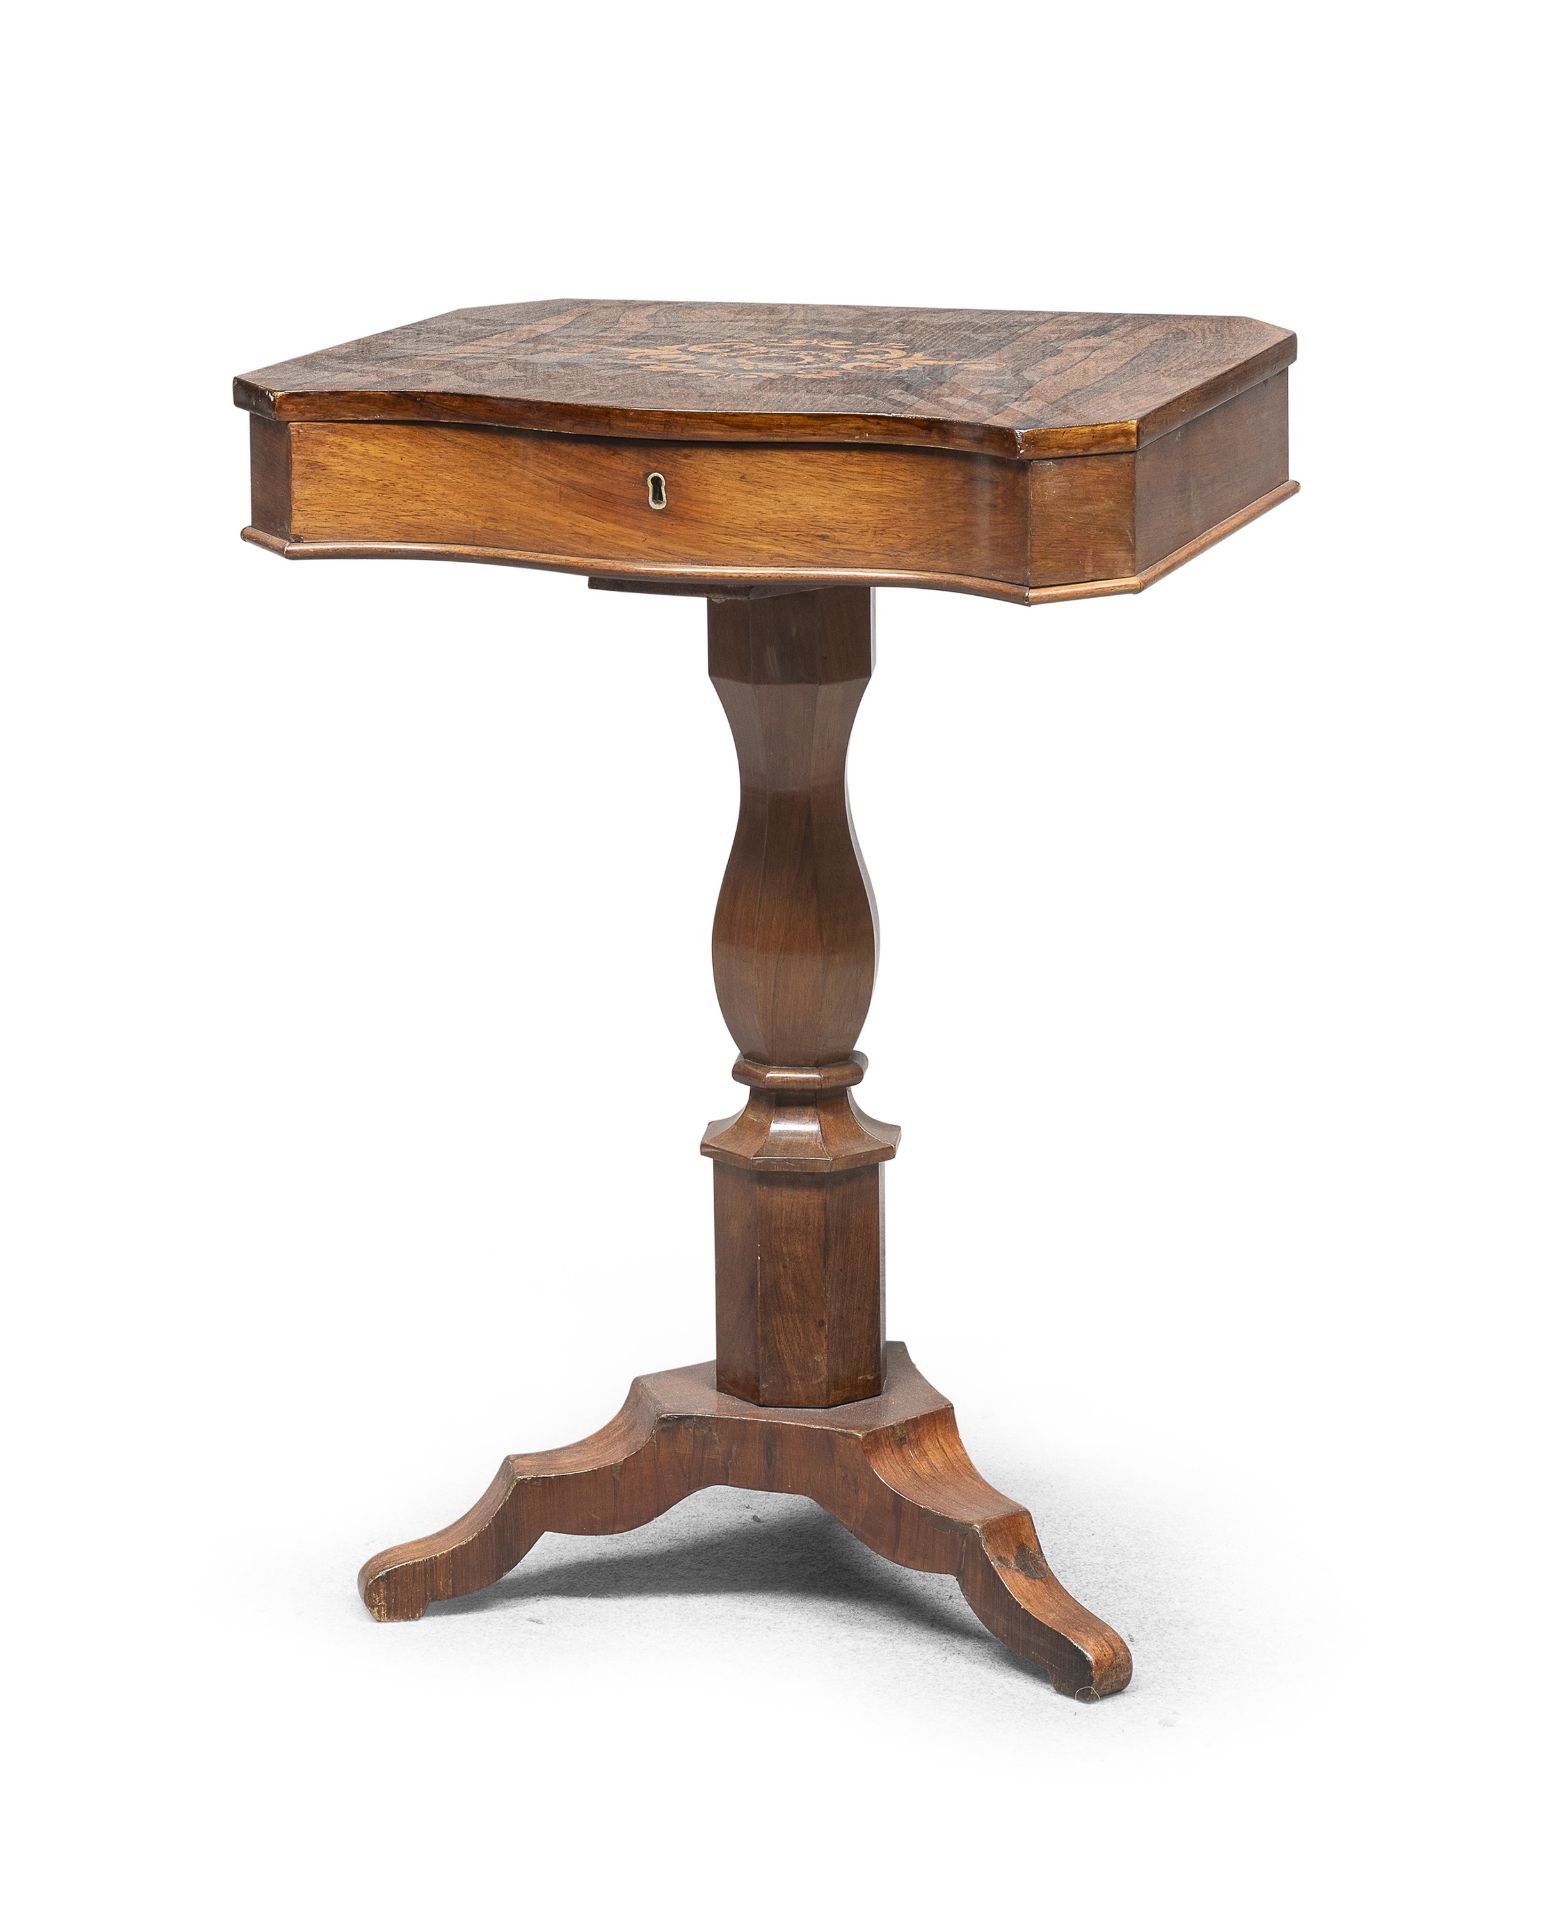 BEAUTIFUL ROSEWOOD WORK TABLE 19th CENTURY